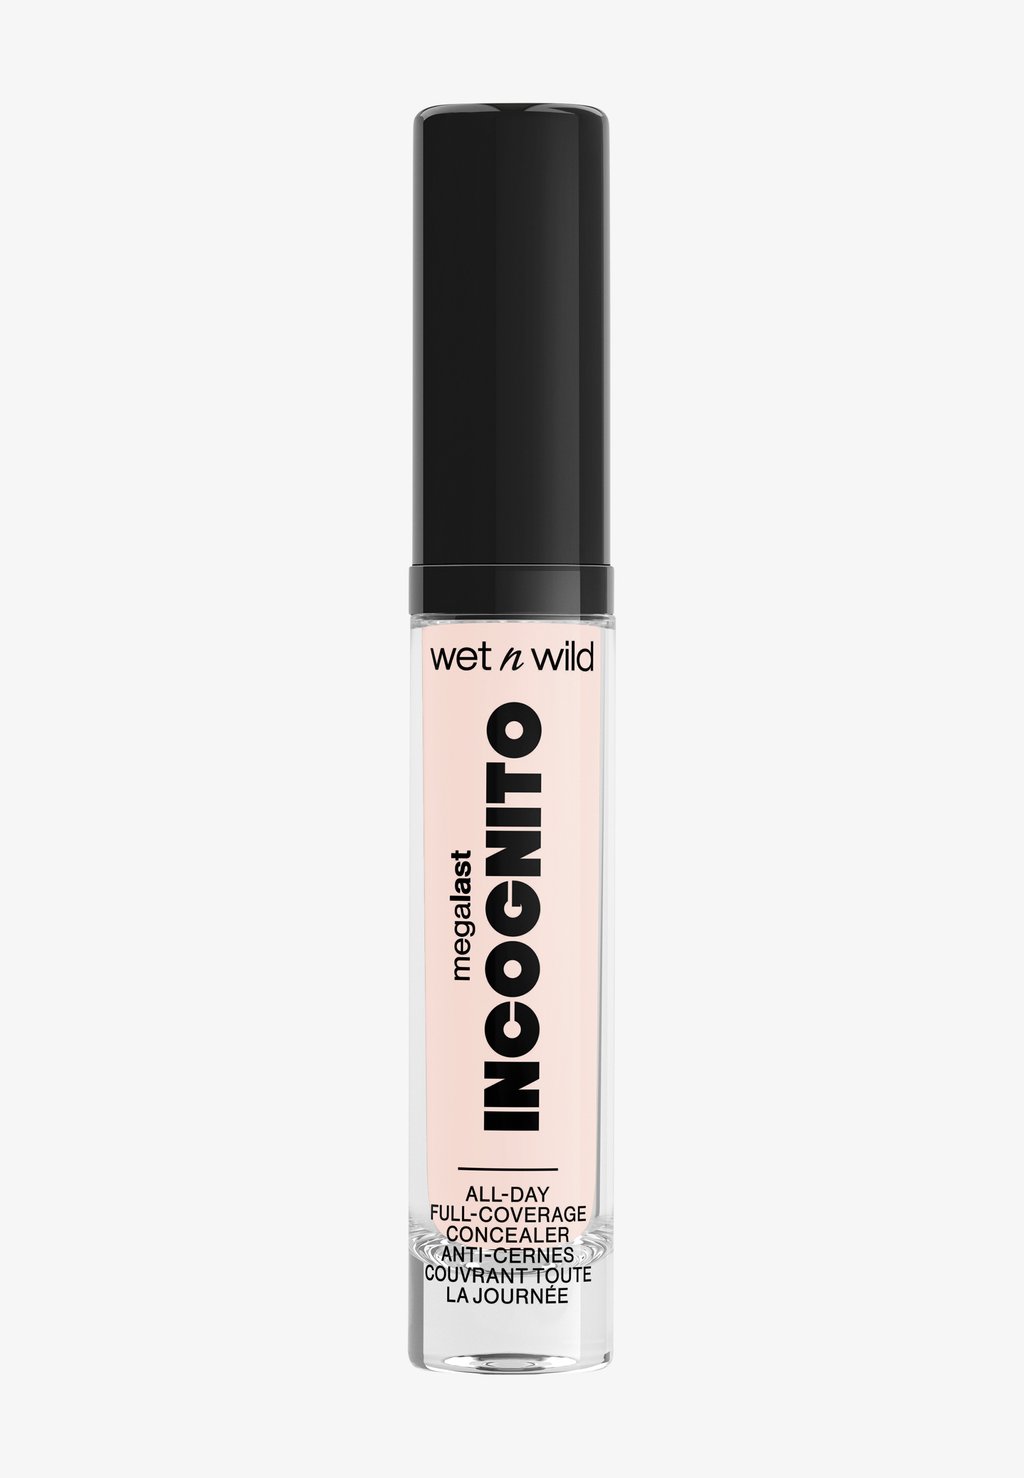 Консилер Megalast Incognito All-Day Full Coverage Concealer WET N WILD, цвет fair beige фотографии